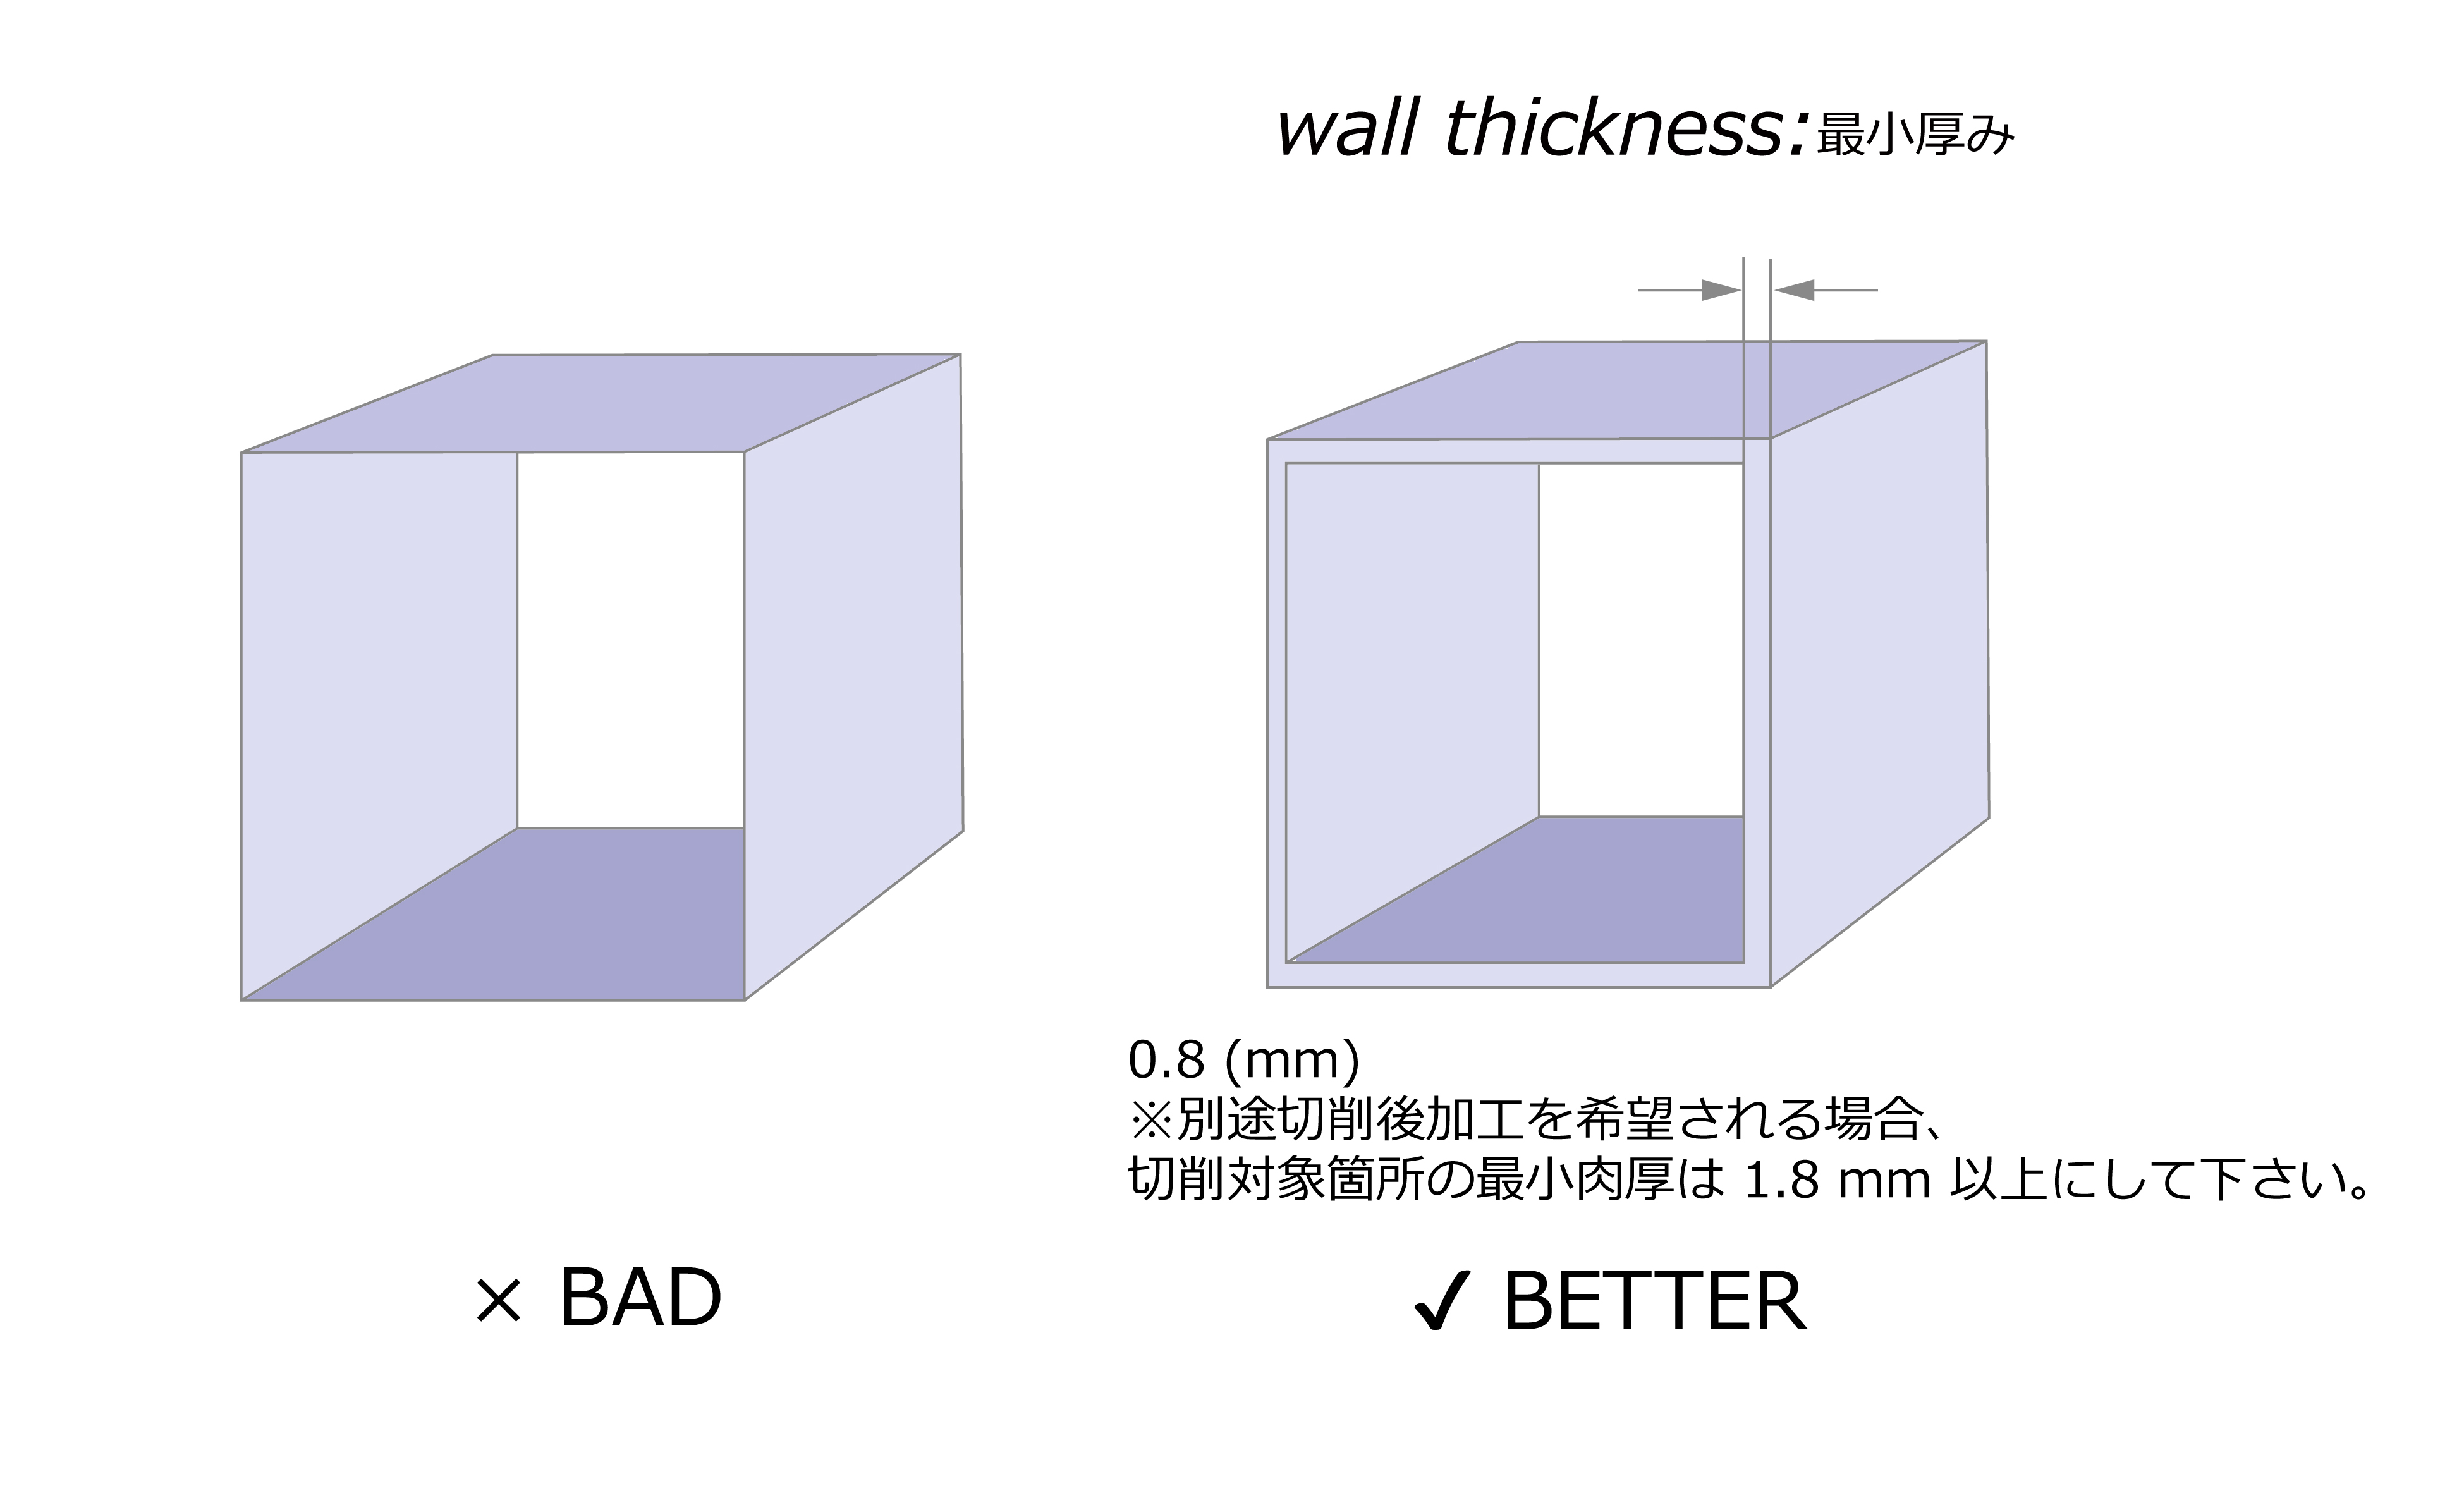 Stainless wall thickness